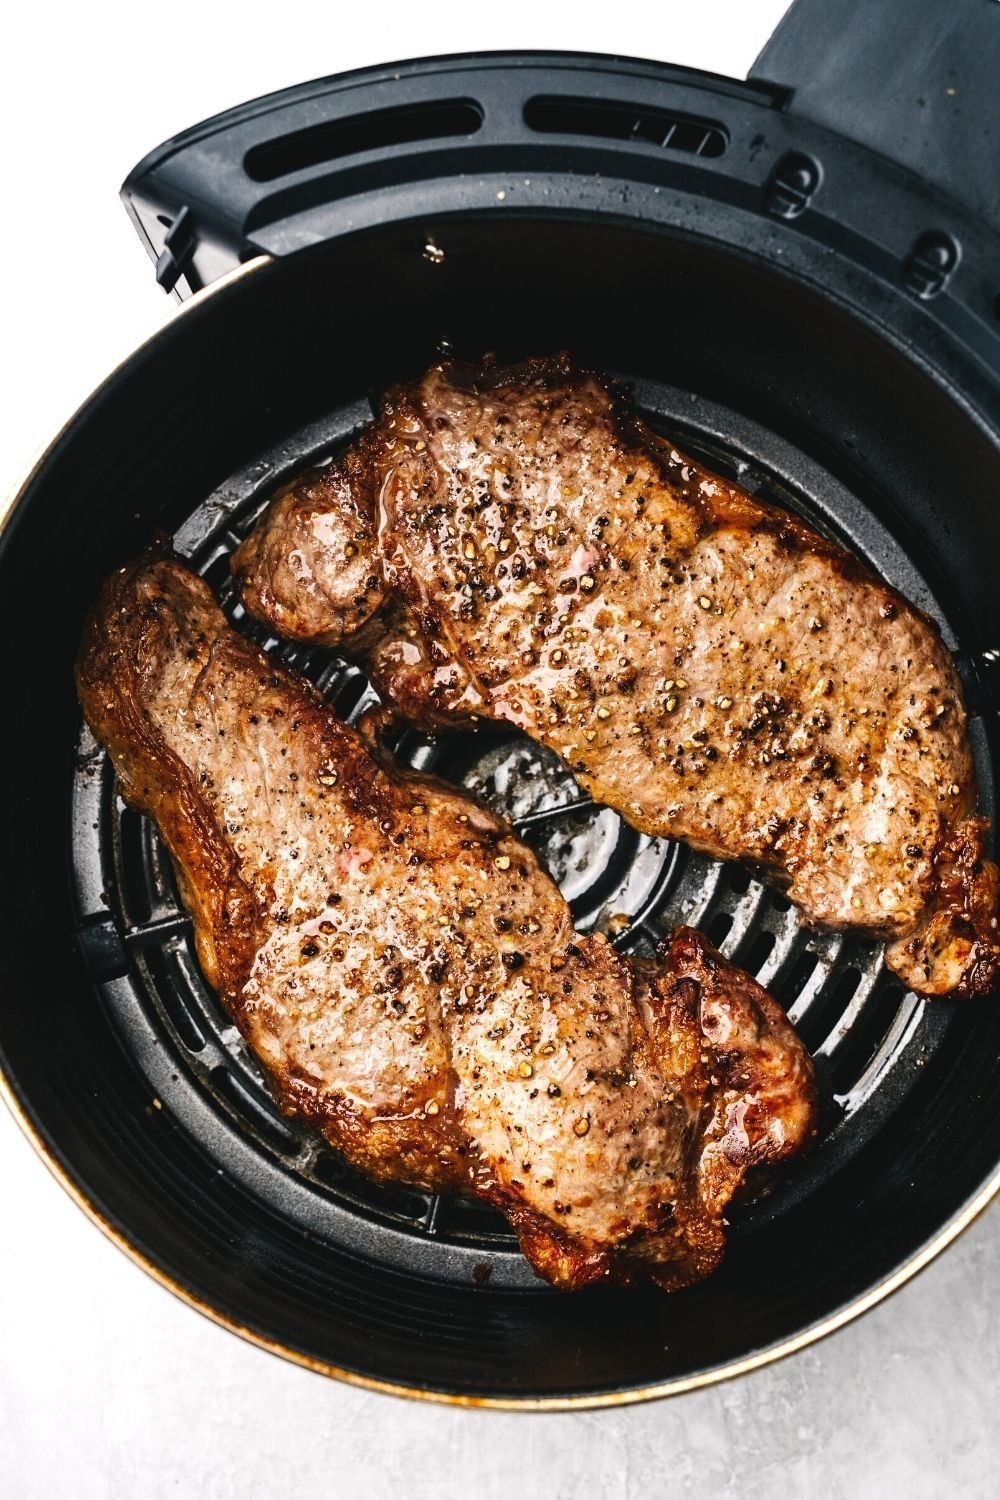 How to Easily Reheat Steak in the Air Fryer